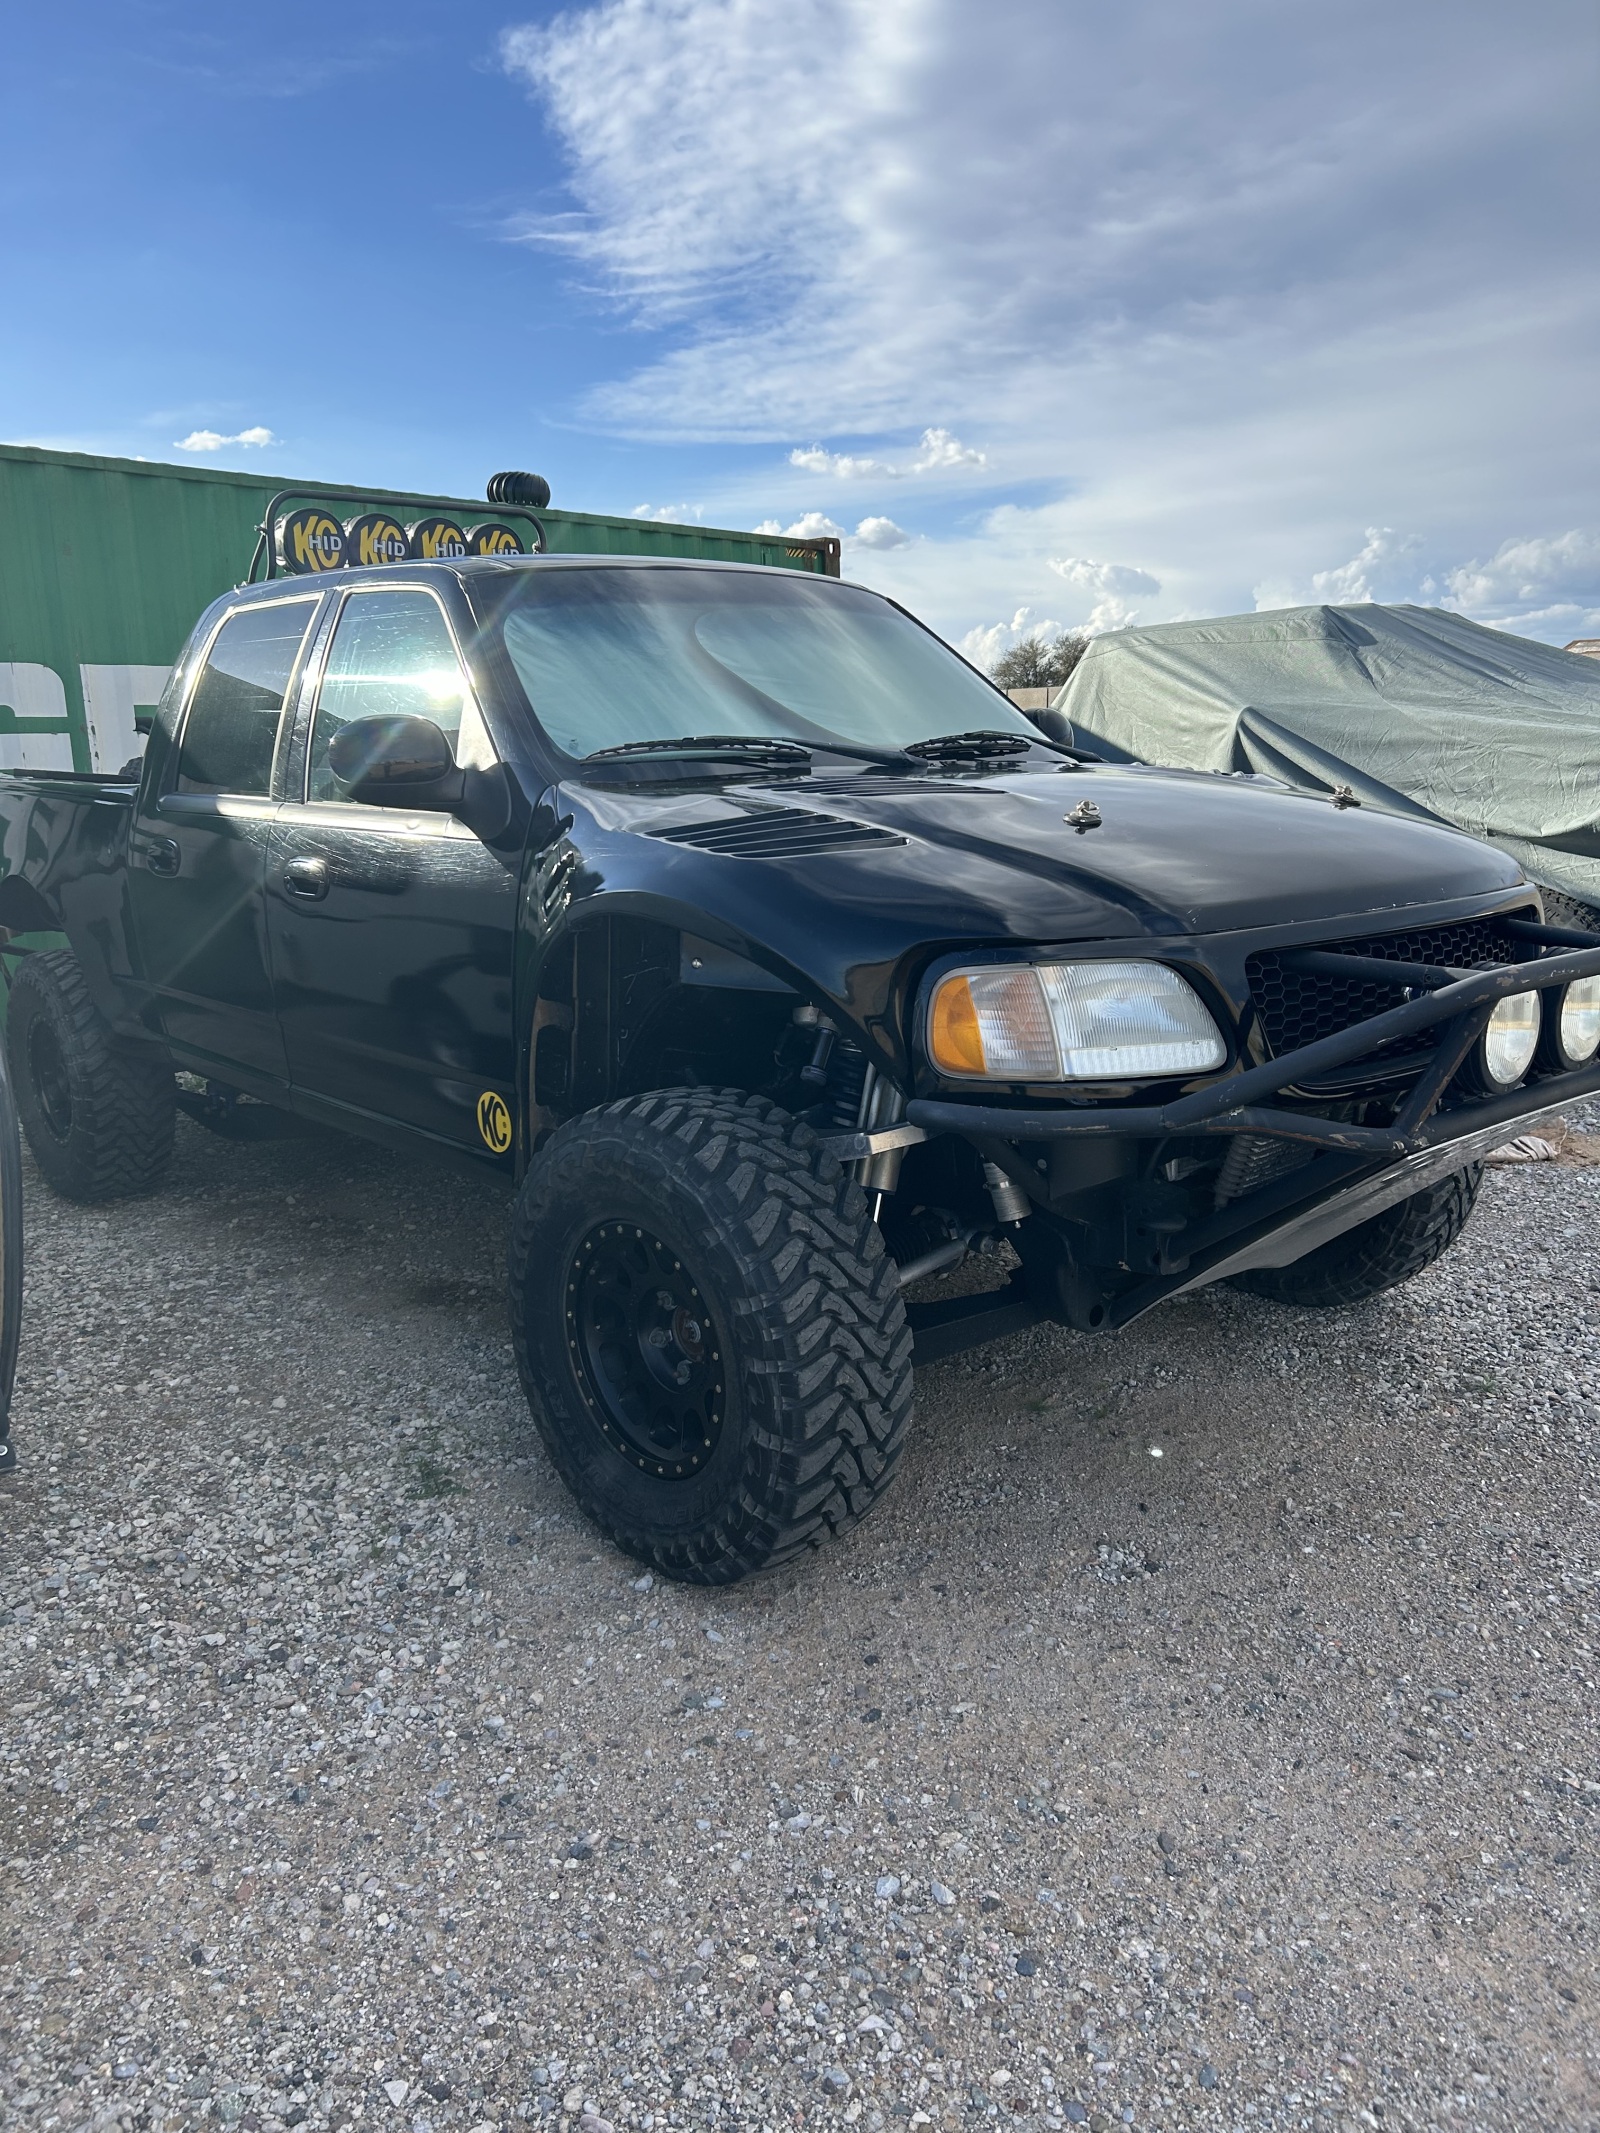 For Sale: 02 F150 Supercrew Linked 4wd Prerunner  - photo0